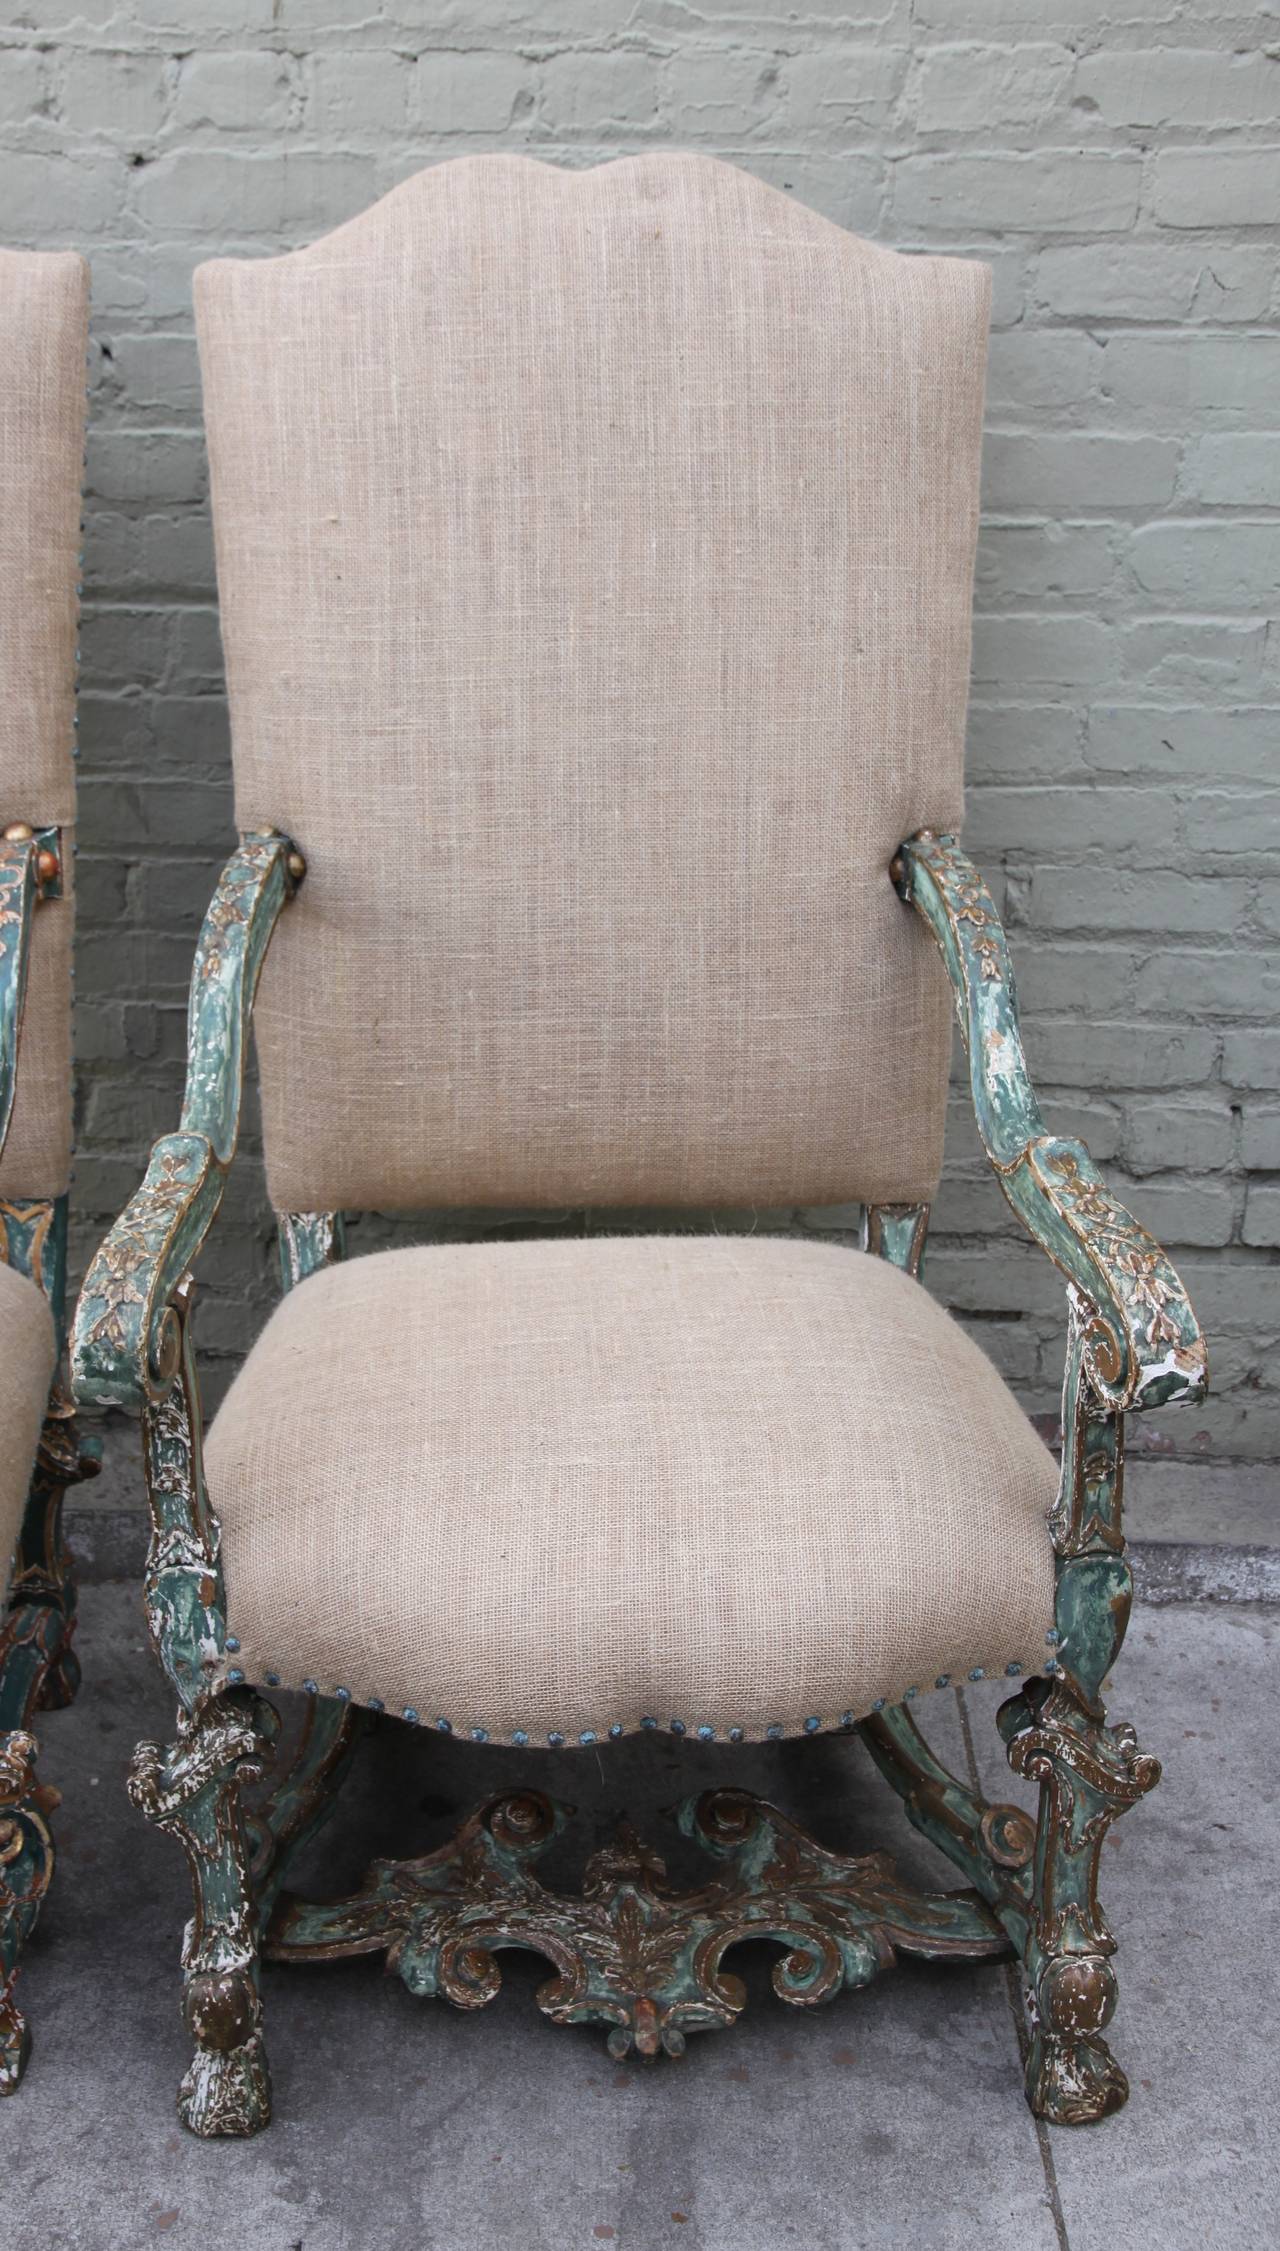 Pair of Italian Baroque painted and parcel-gilt armchairs each upholstered in burlap textile with nailhead trim detail and having a carved and green painted frame, high back, scrolling arms and an elaborately carved scrolling H-shaped stretcher.